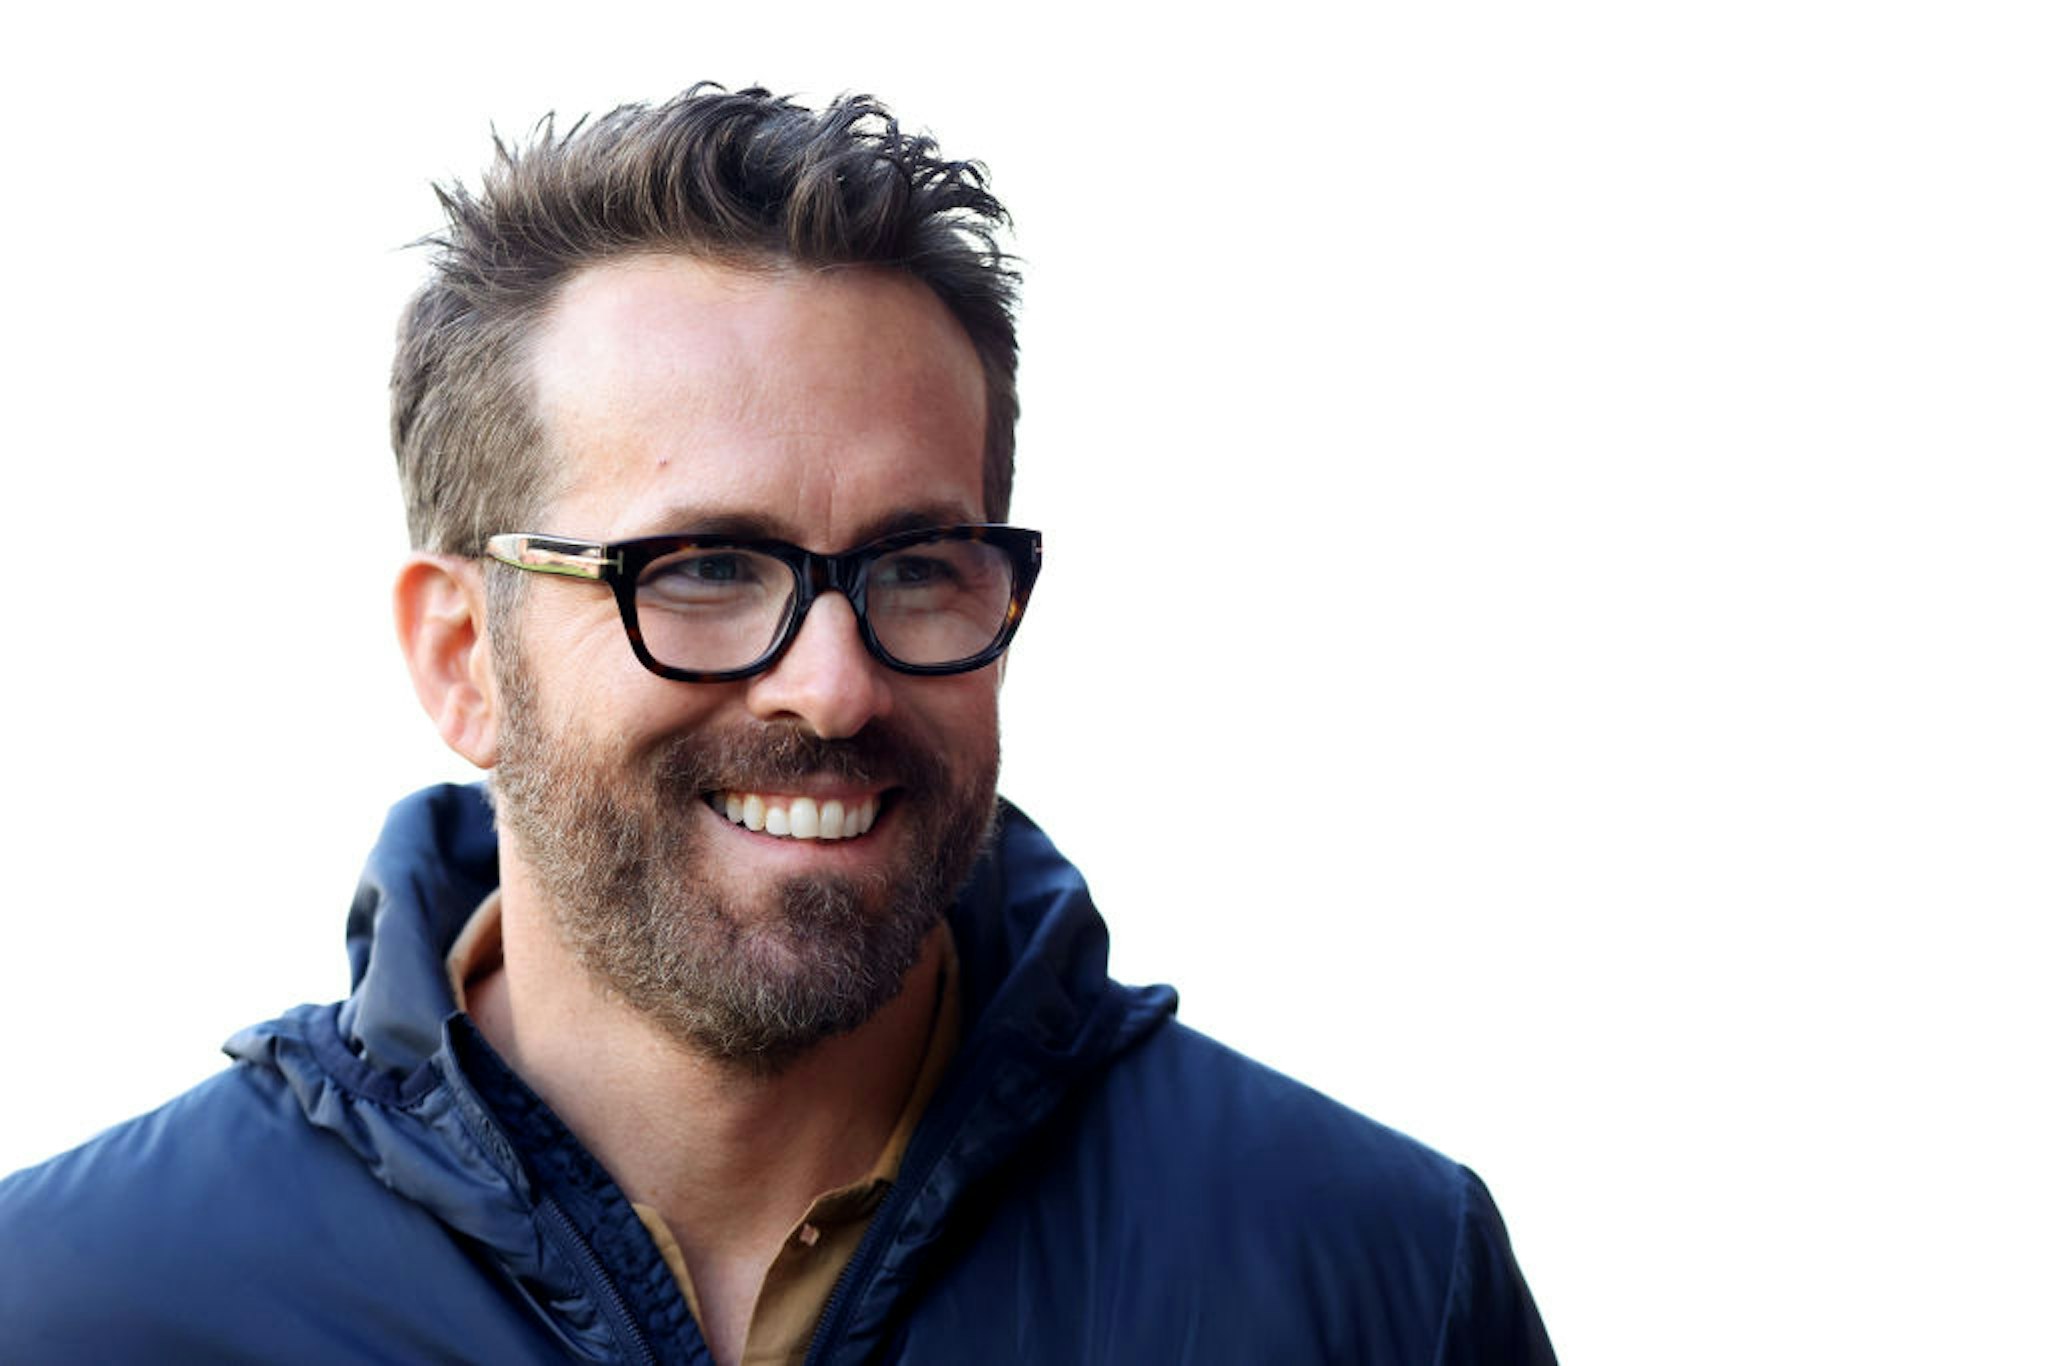 WREXHAM, WALES - APRIL 10: Ryan Reynolds, Owner of Wrexham smiles prior to the Vanarama National League match between Wrexham and Notts County at The Racecourse on April 10, 2023 in Wrexham, Wales. (Photo by Jan Kruger/Getty Images)